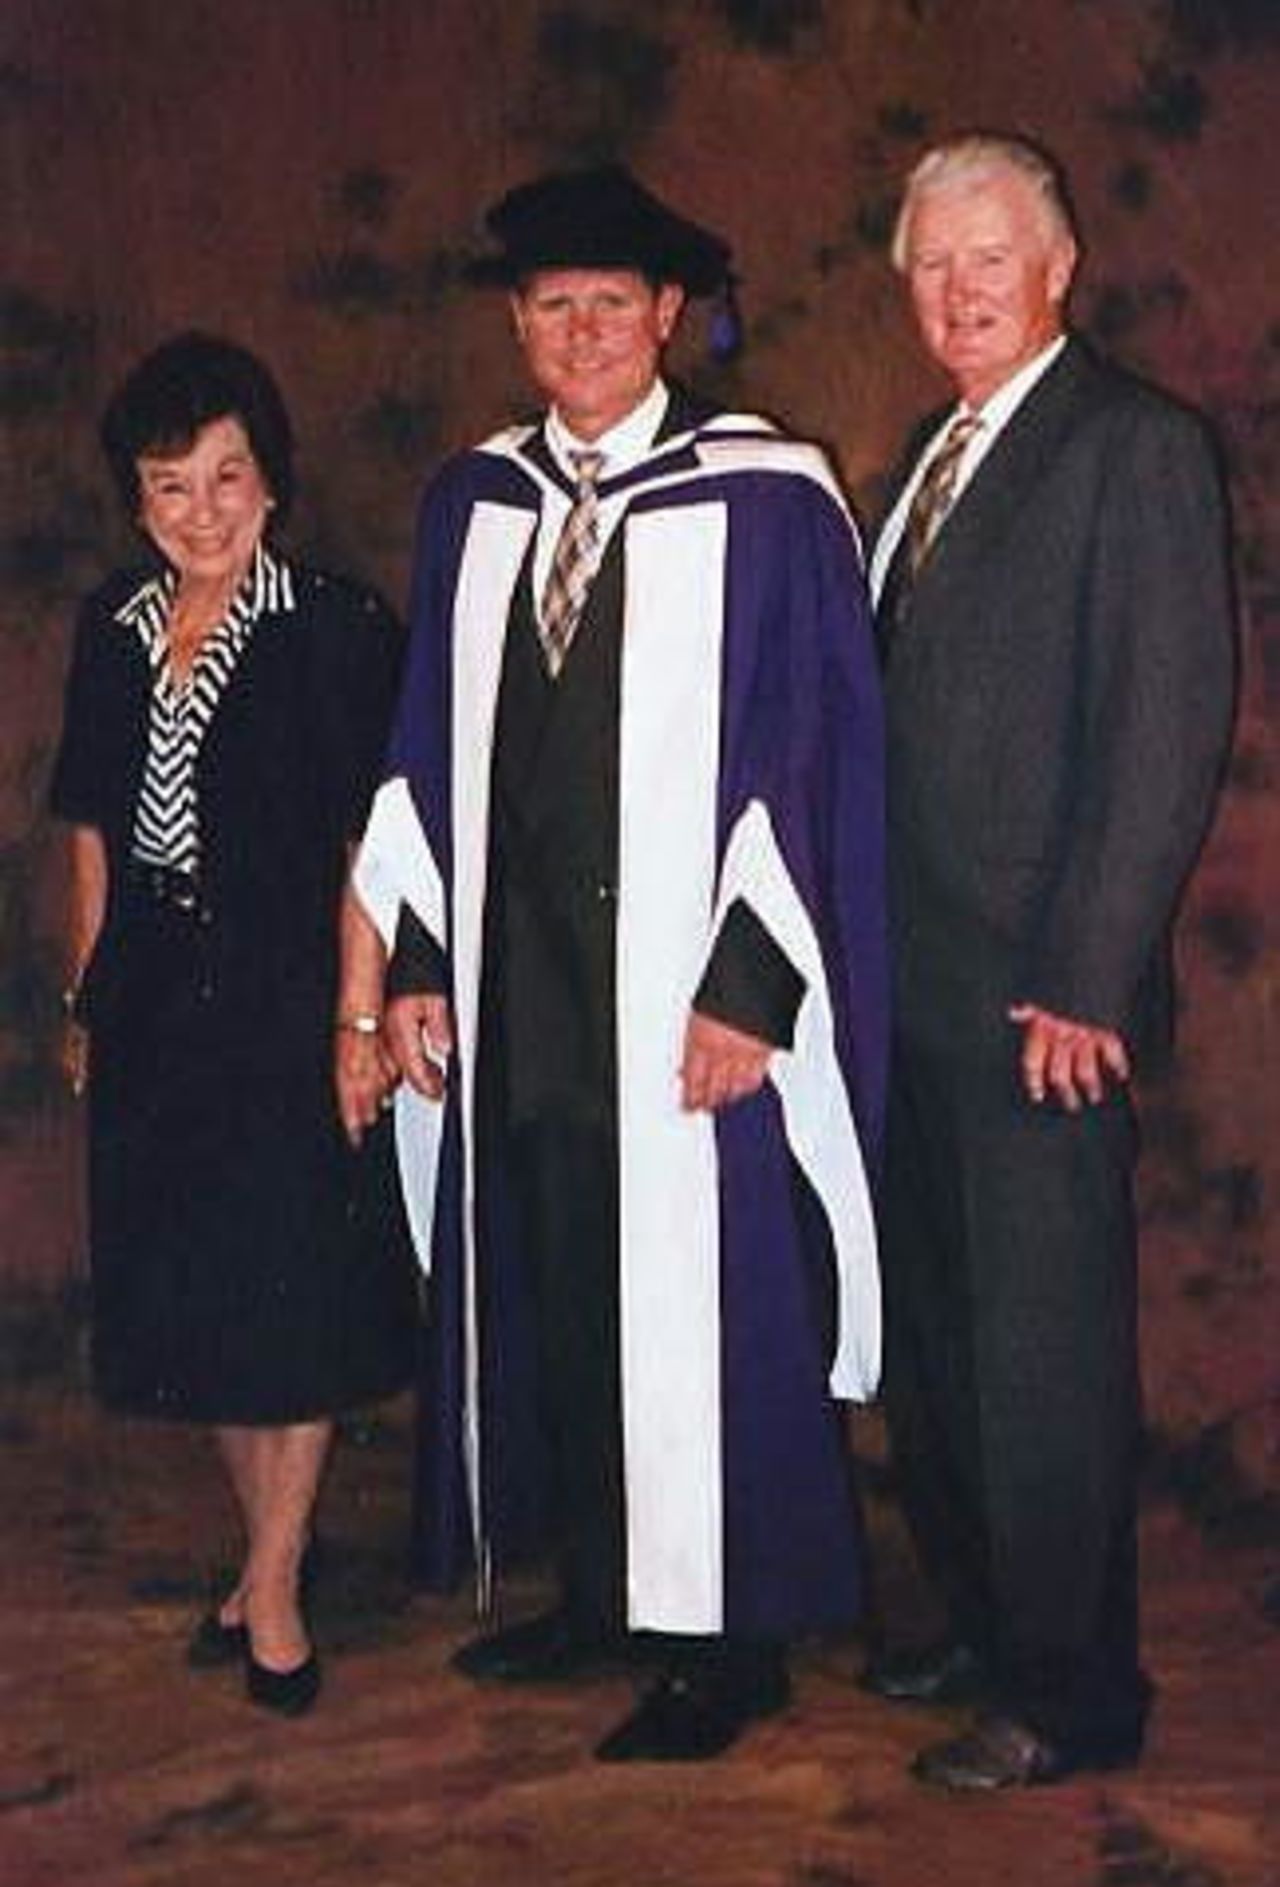 Robin Smith robed for his investiture as Doctor of Letters (hon) at Portsmouth University, here seen with mother and father Joy and John